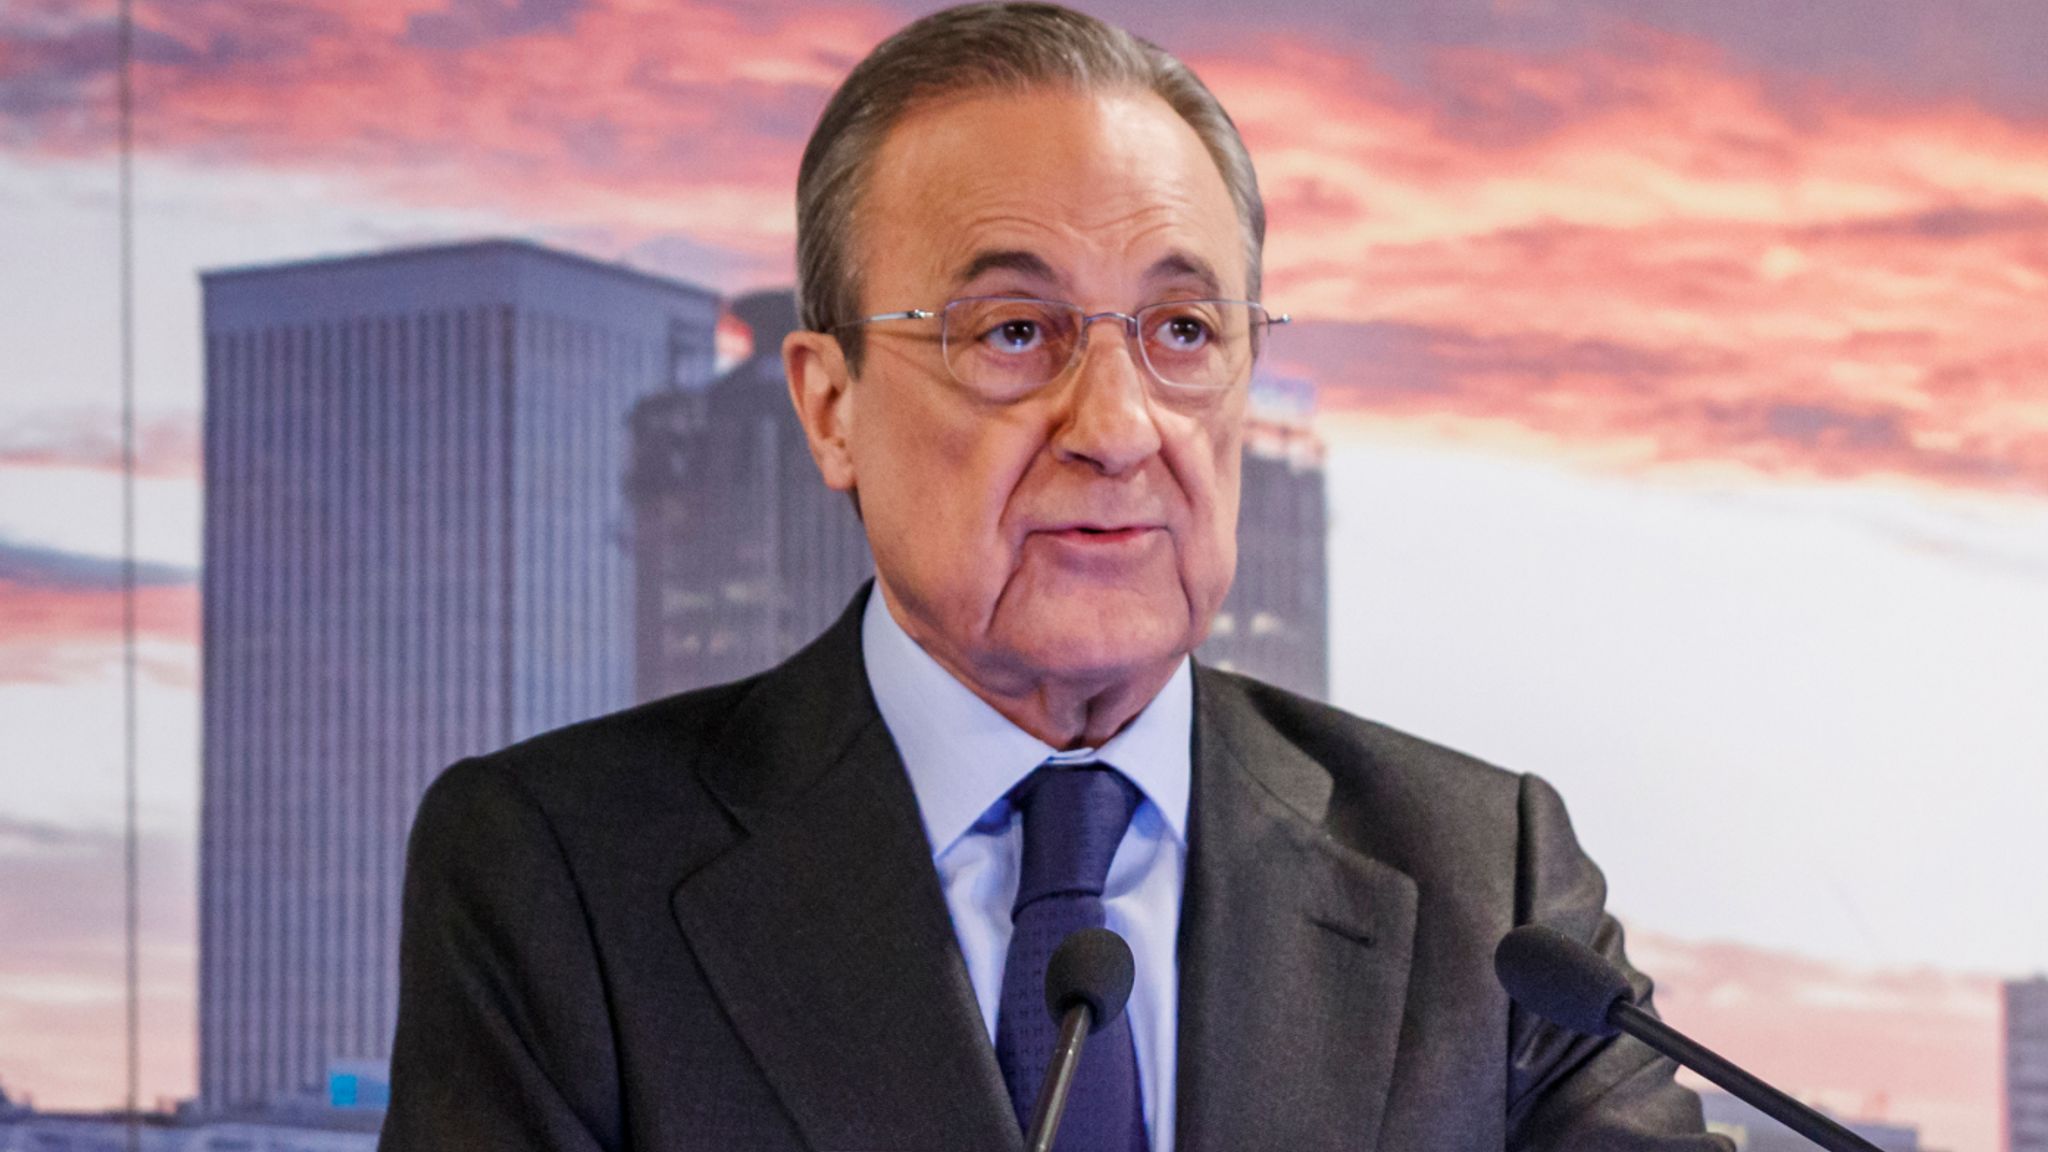 European Super League: Real Madrid president Florentino Perez says plans are not 'dead' despite withdrawals